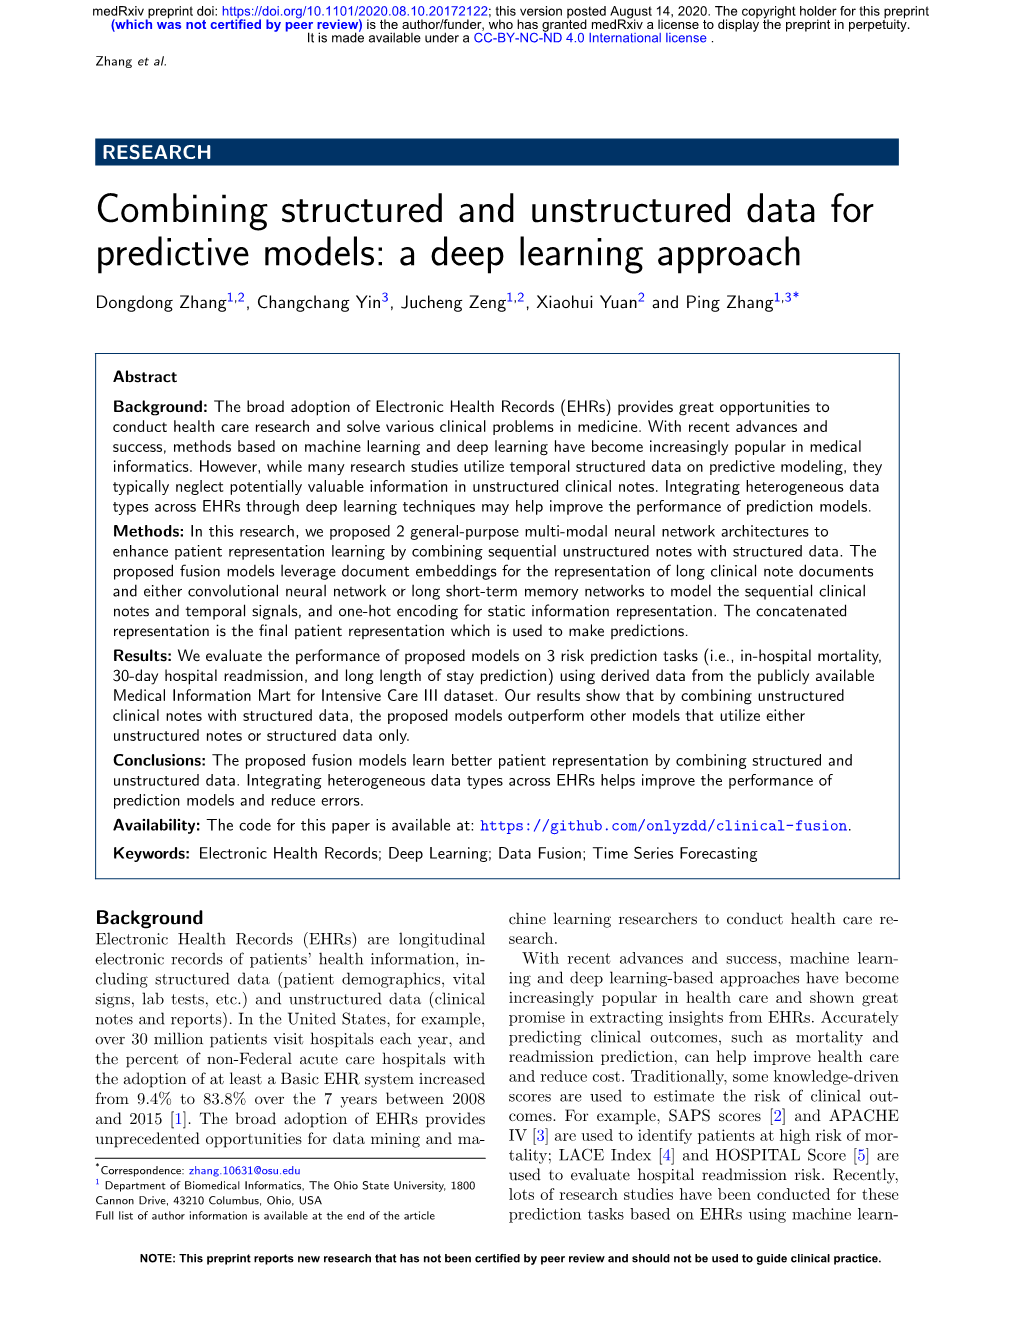 Combining Structured and Unstructured Data for Predictive Models: a Deep Learning Approach